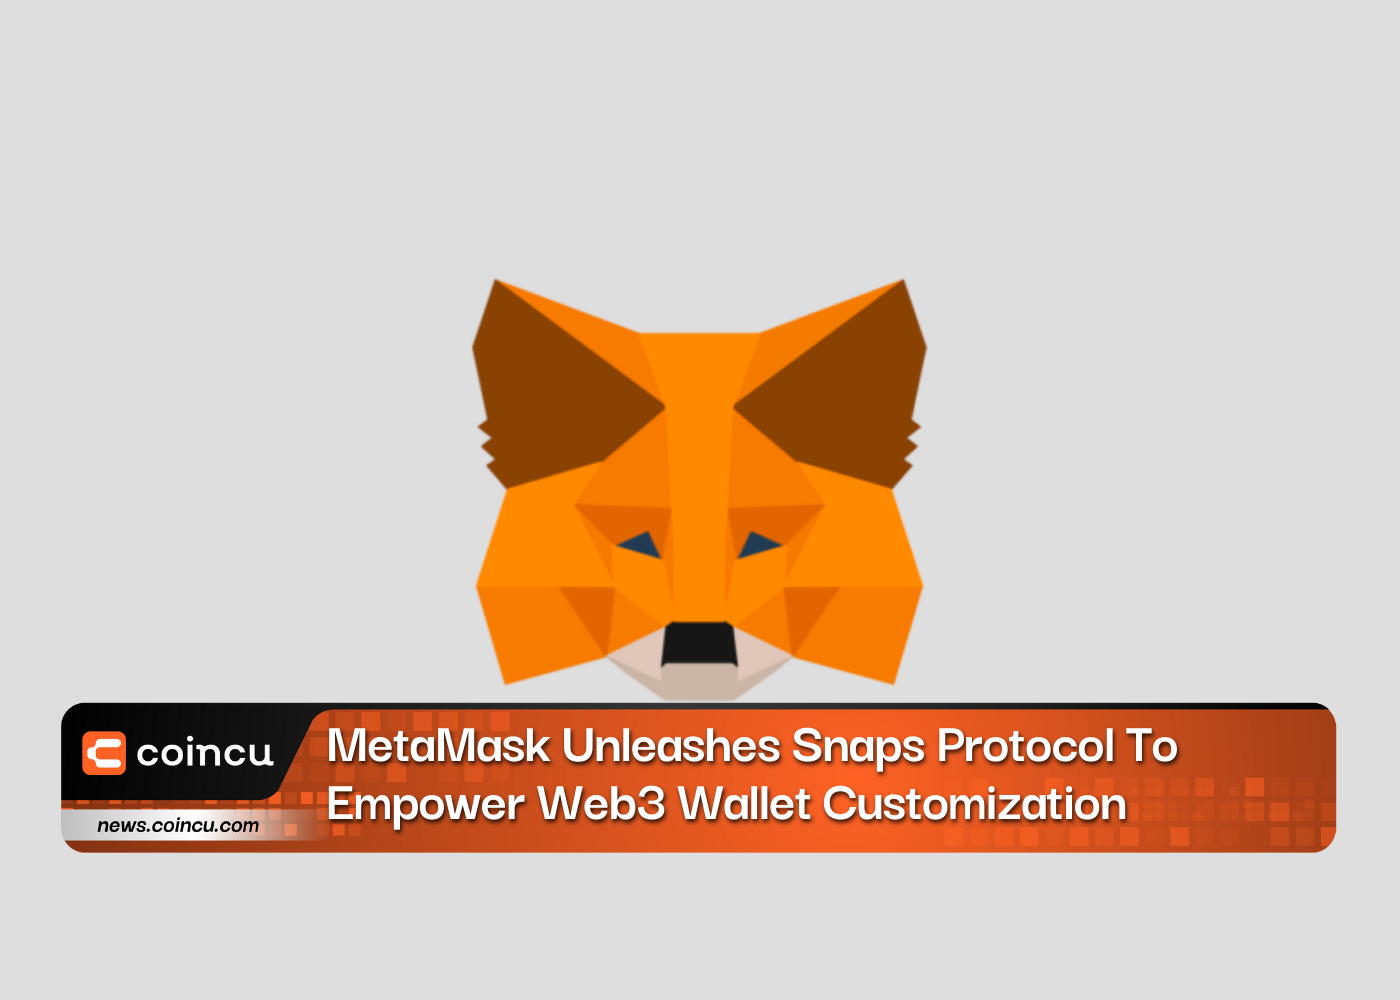 MetaMask Unleashes Snaps Protocol To Empower Web3 Wallet Customization